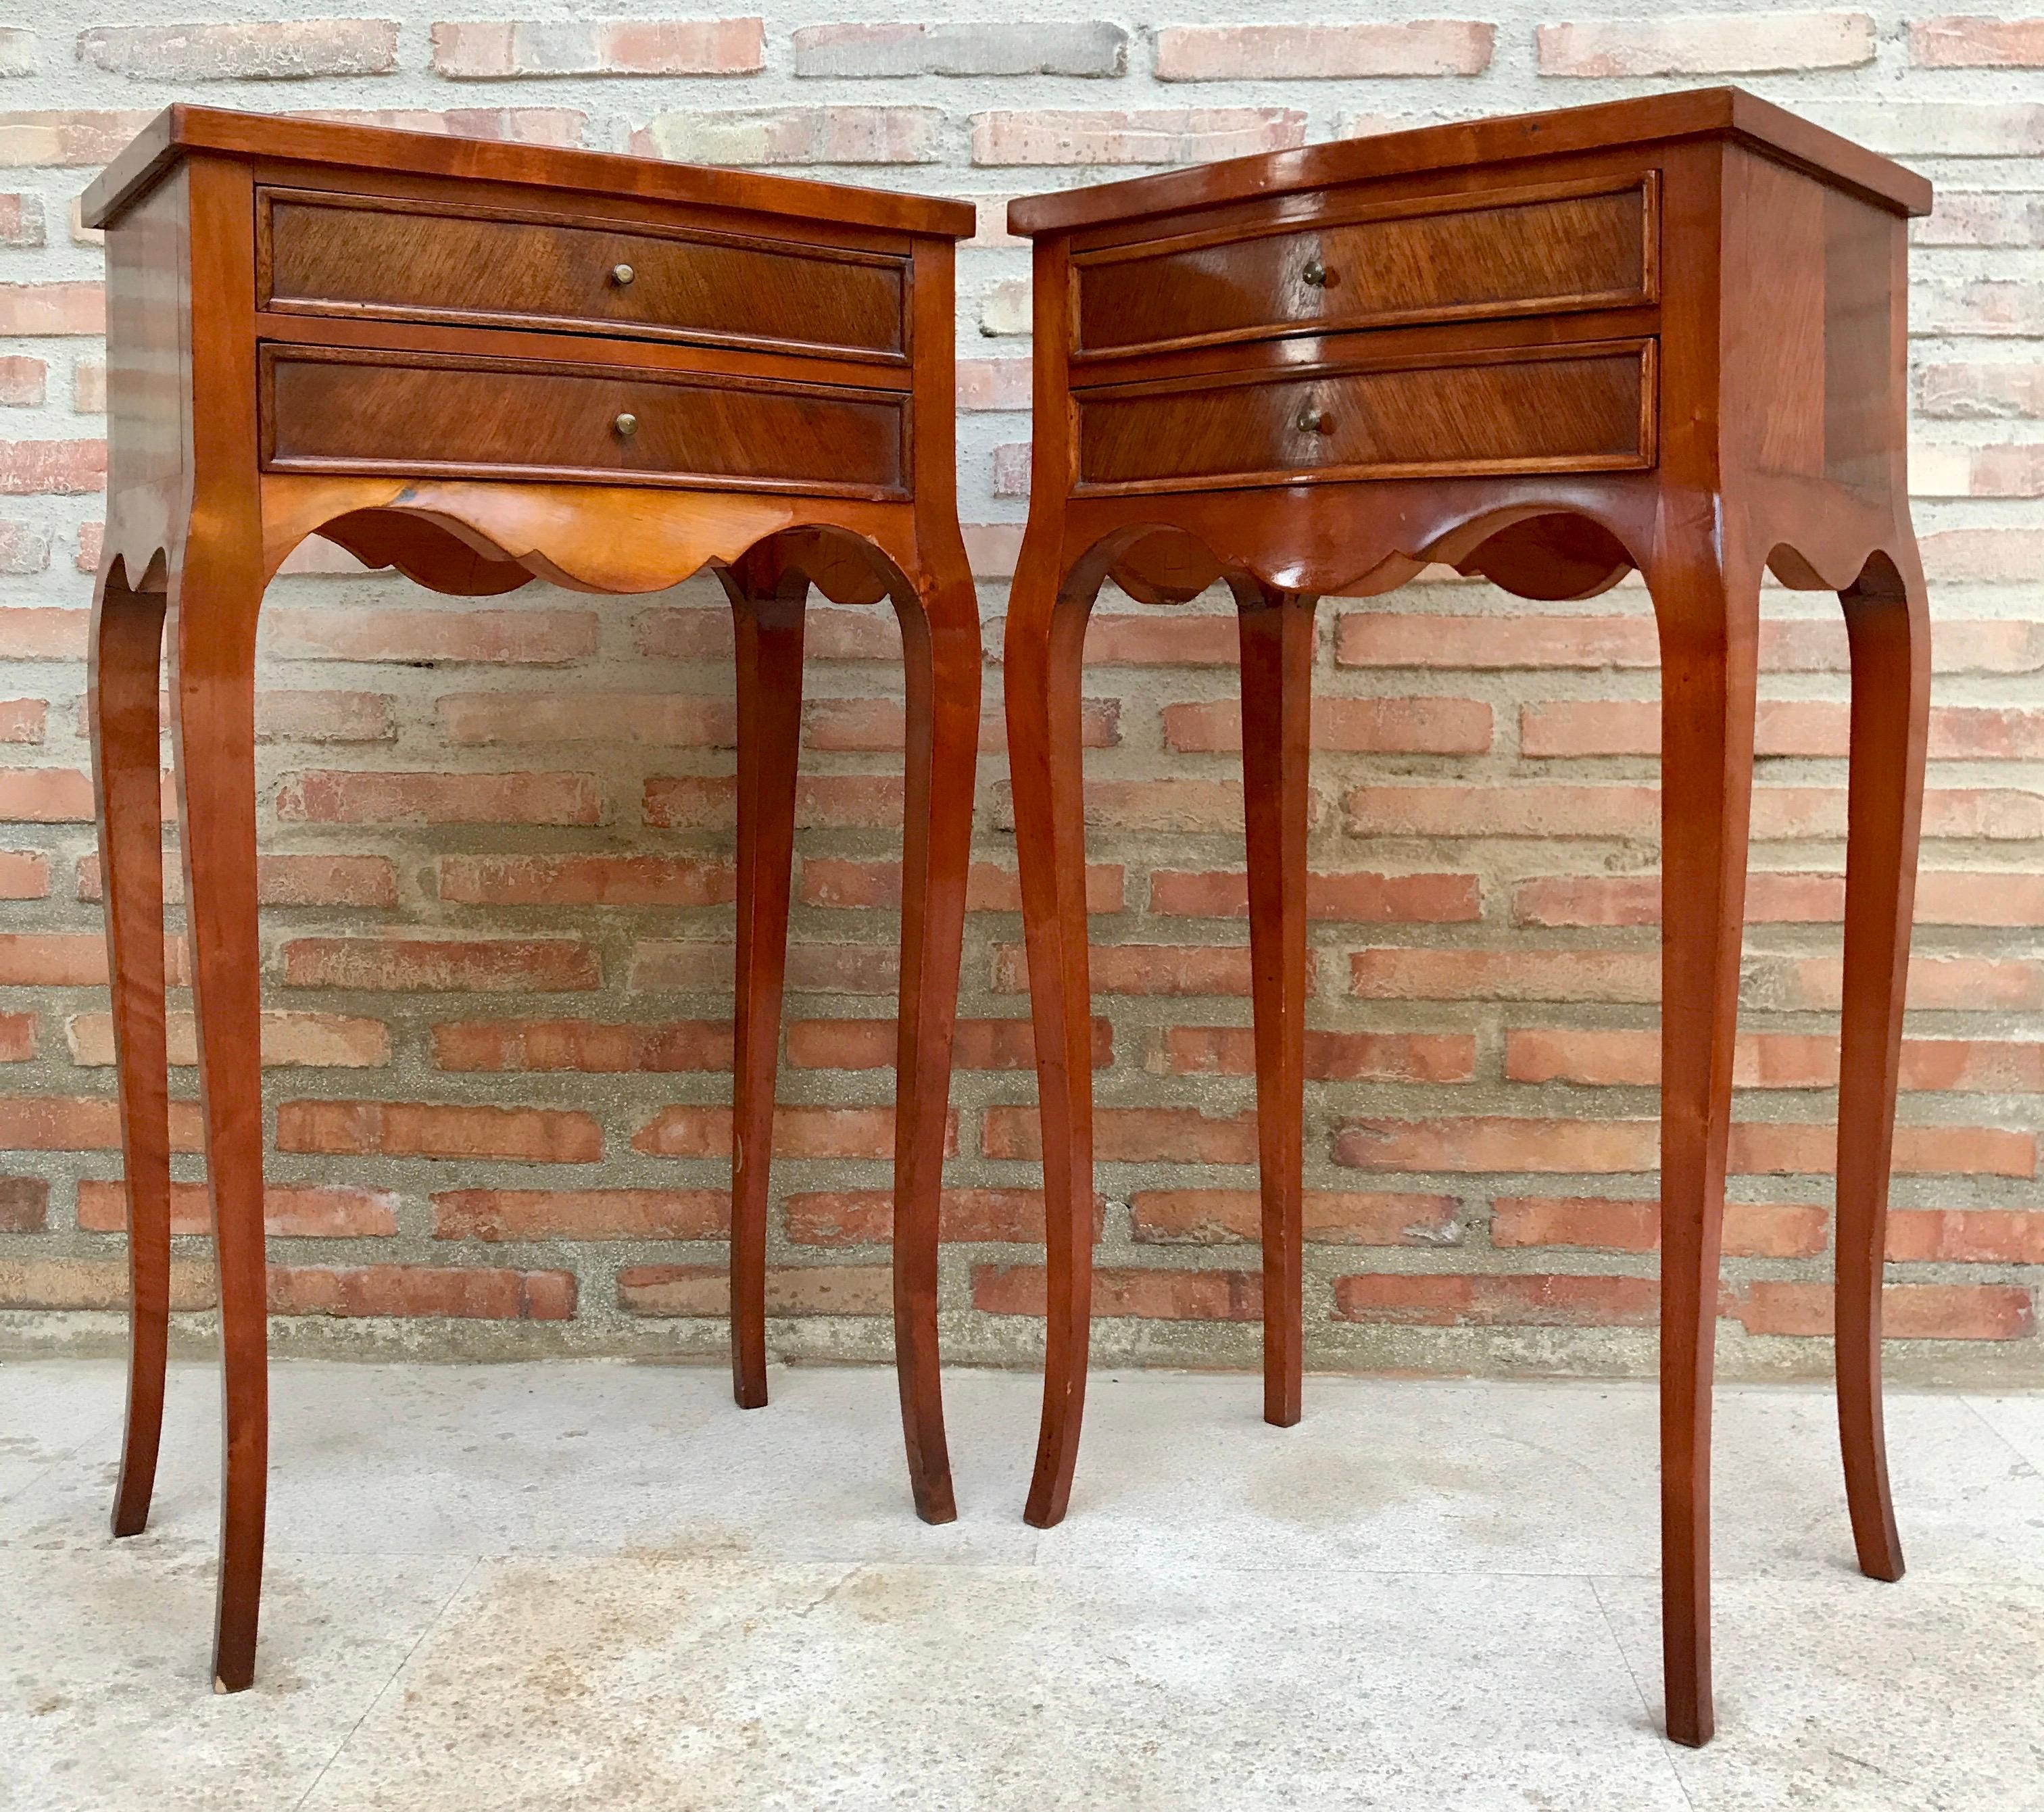 20th century pair of French nightstands with two-drawers and cabriole legs. The tables have a beautiful carved in legs and apron front. 
Really nice patina.